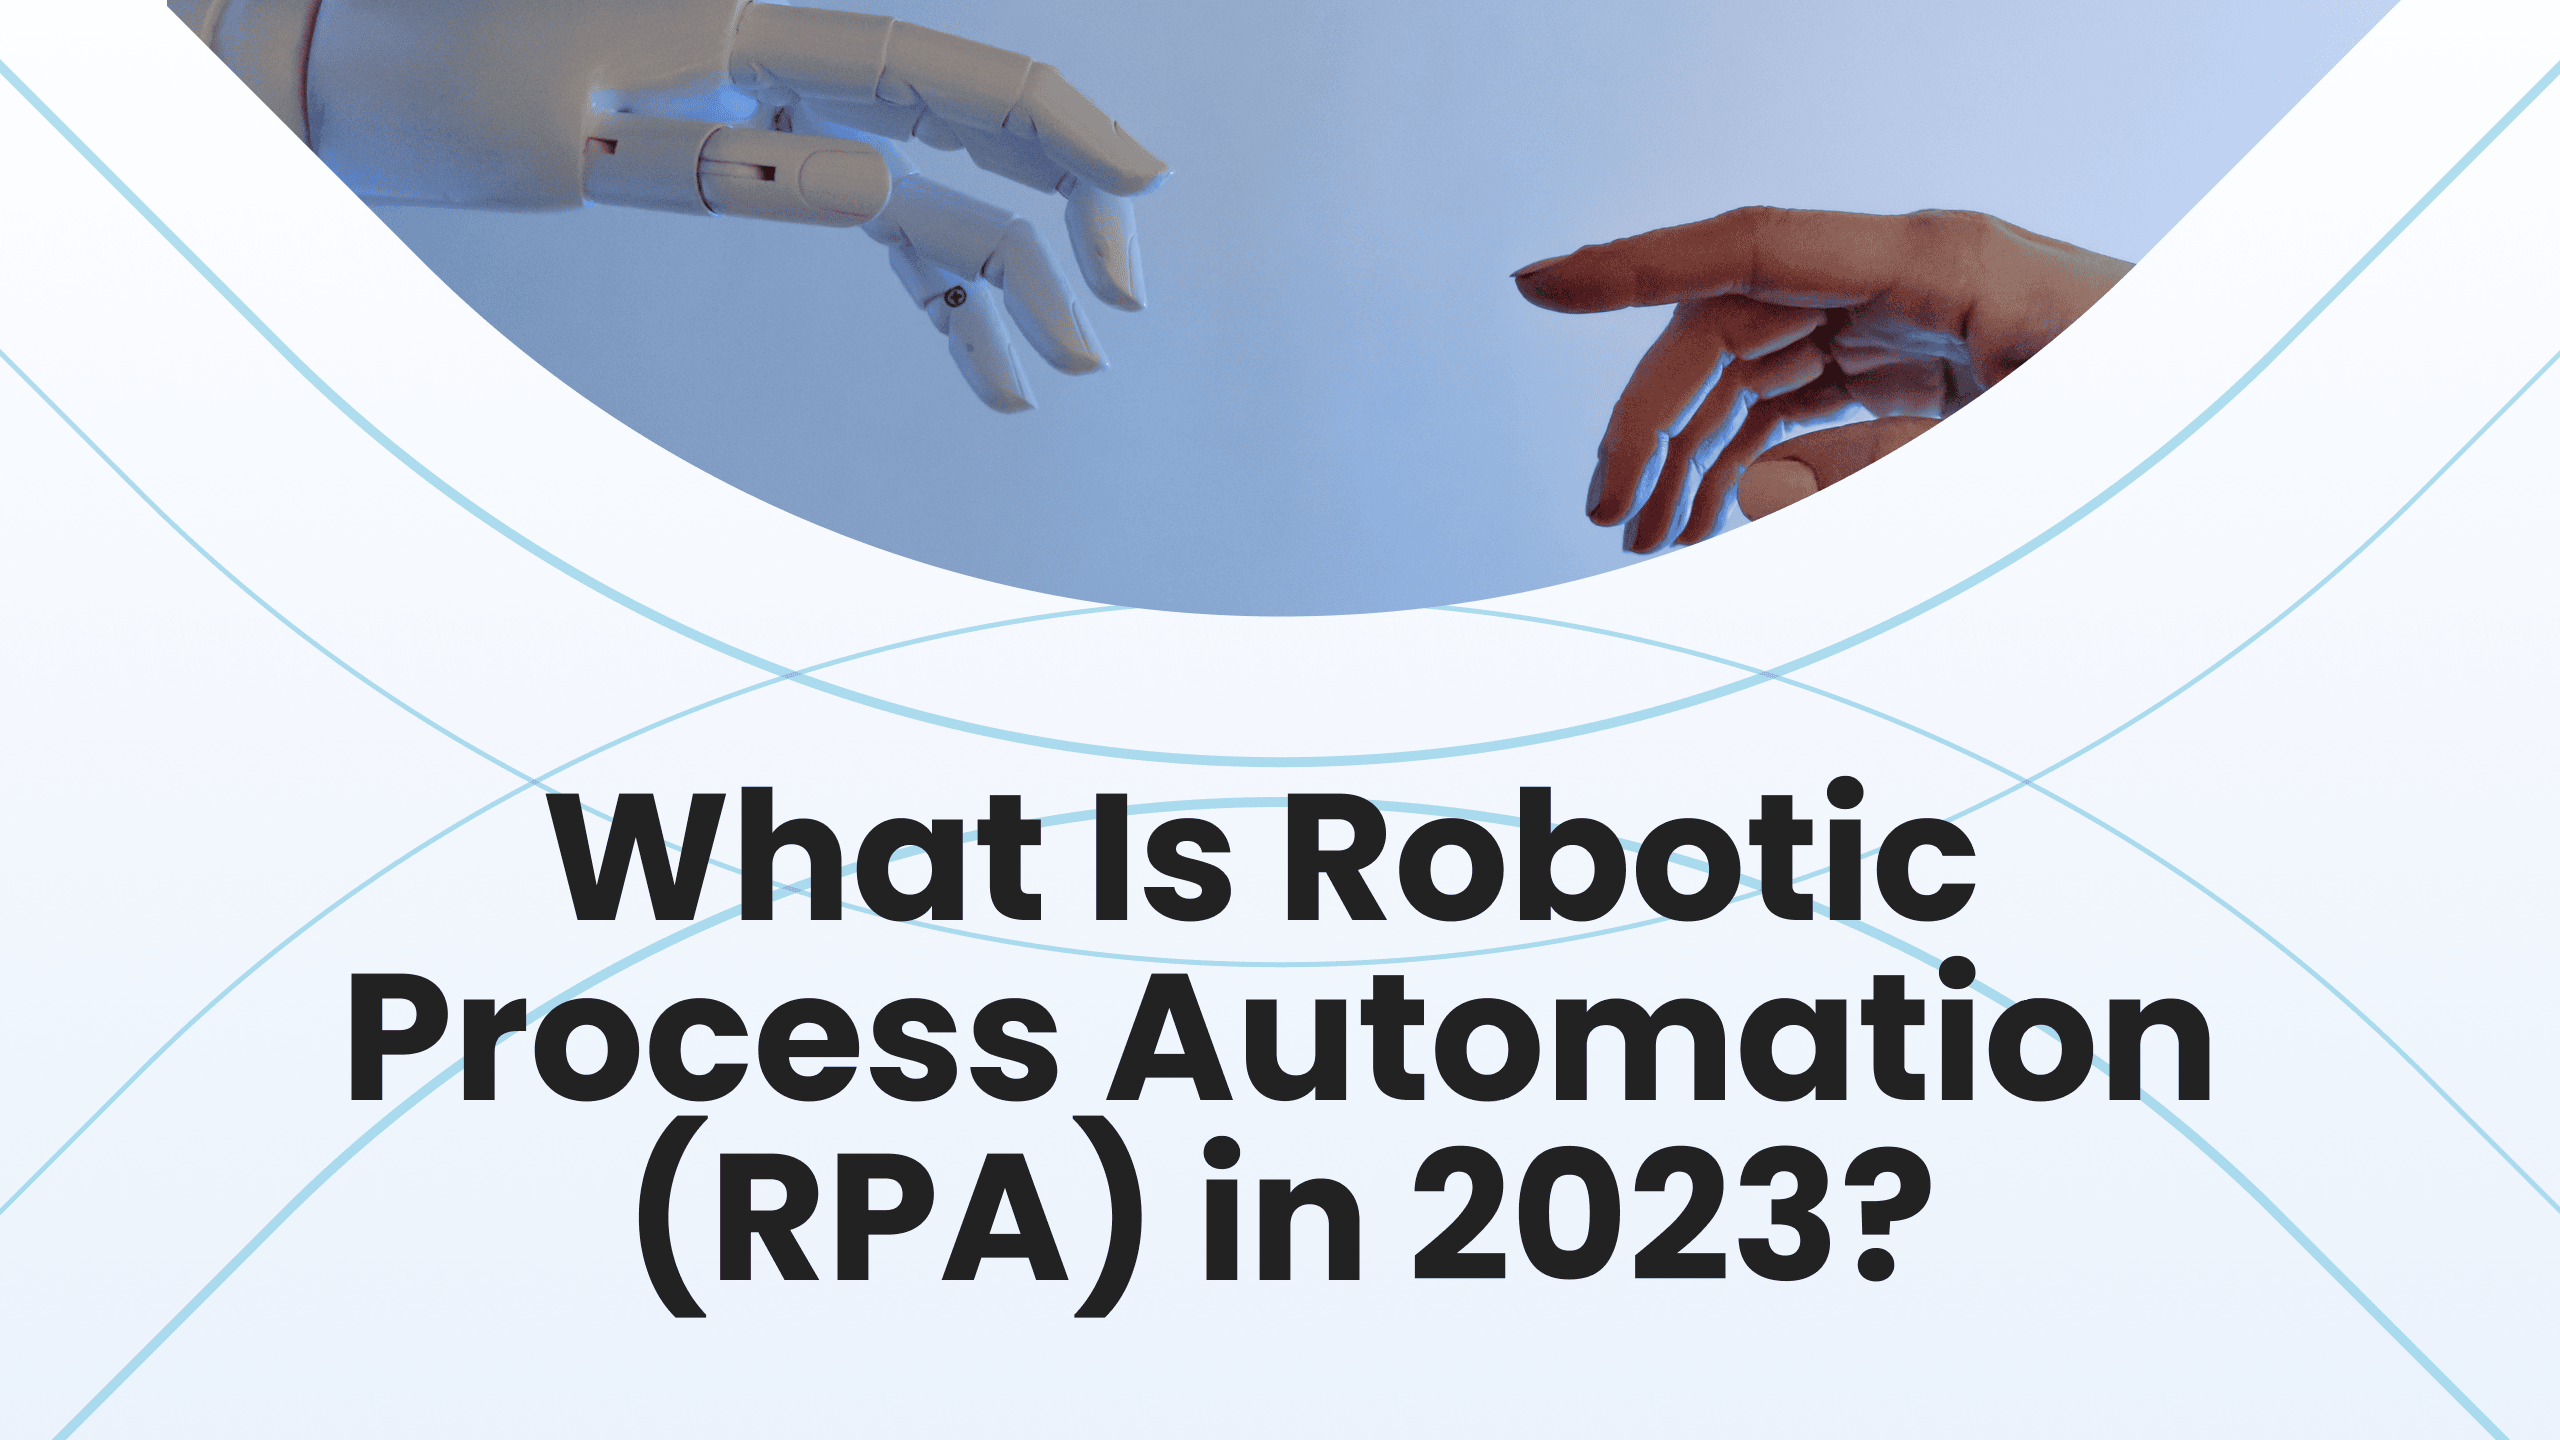 What Is Robotic Process Automation (RPA) in 2023?